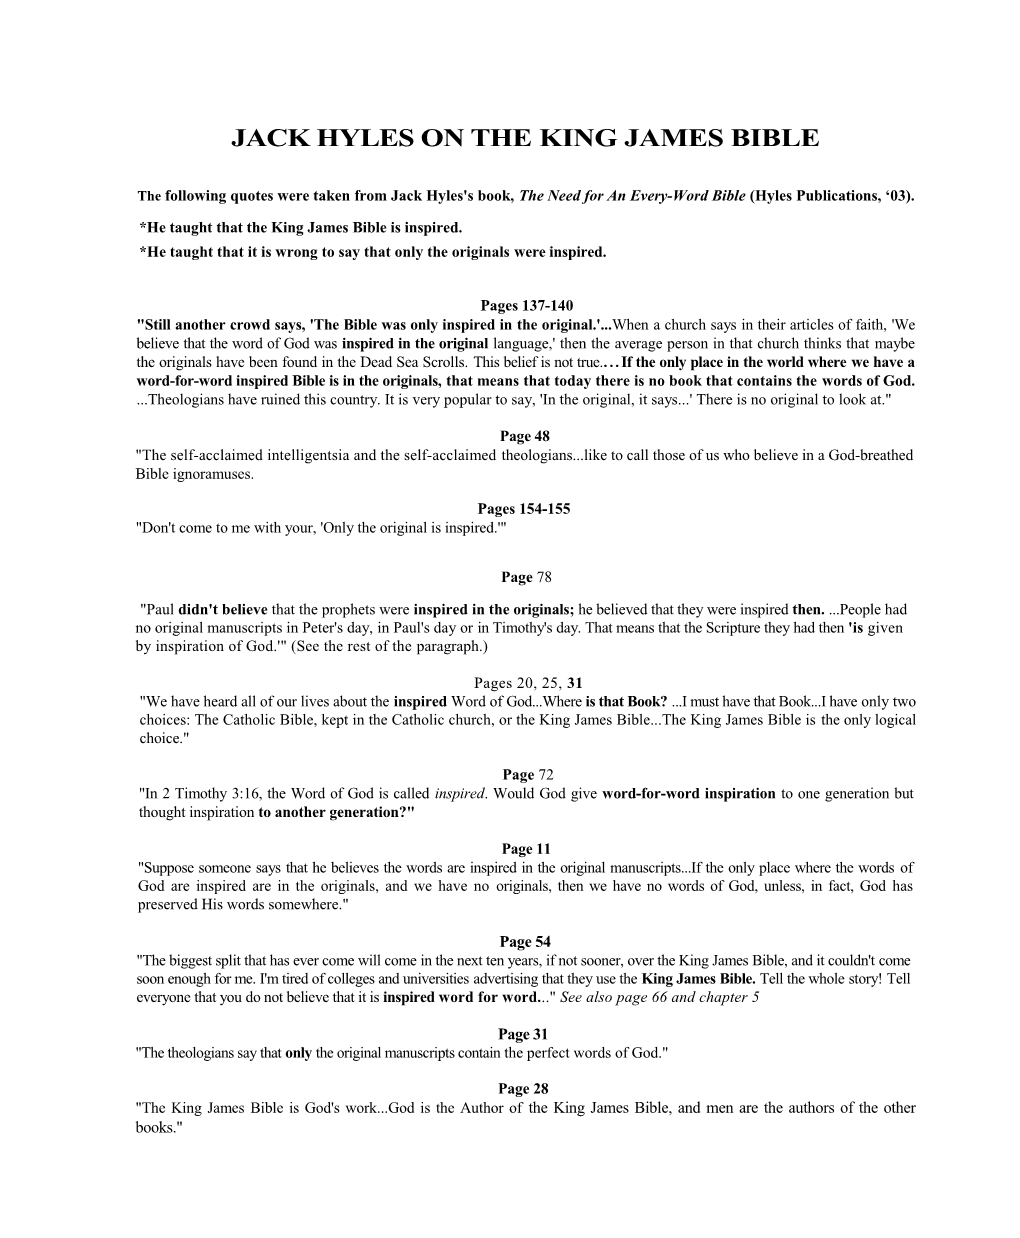 Jack Hyles on the King James Bible